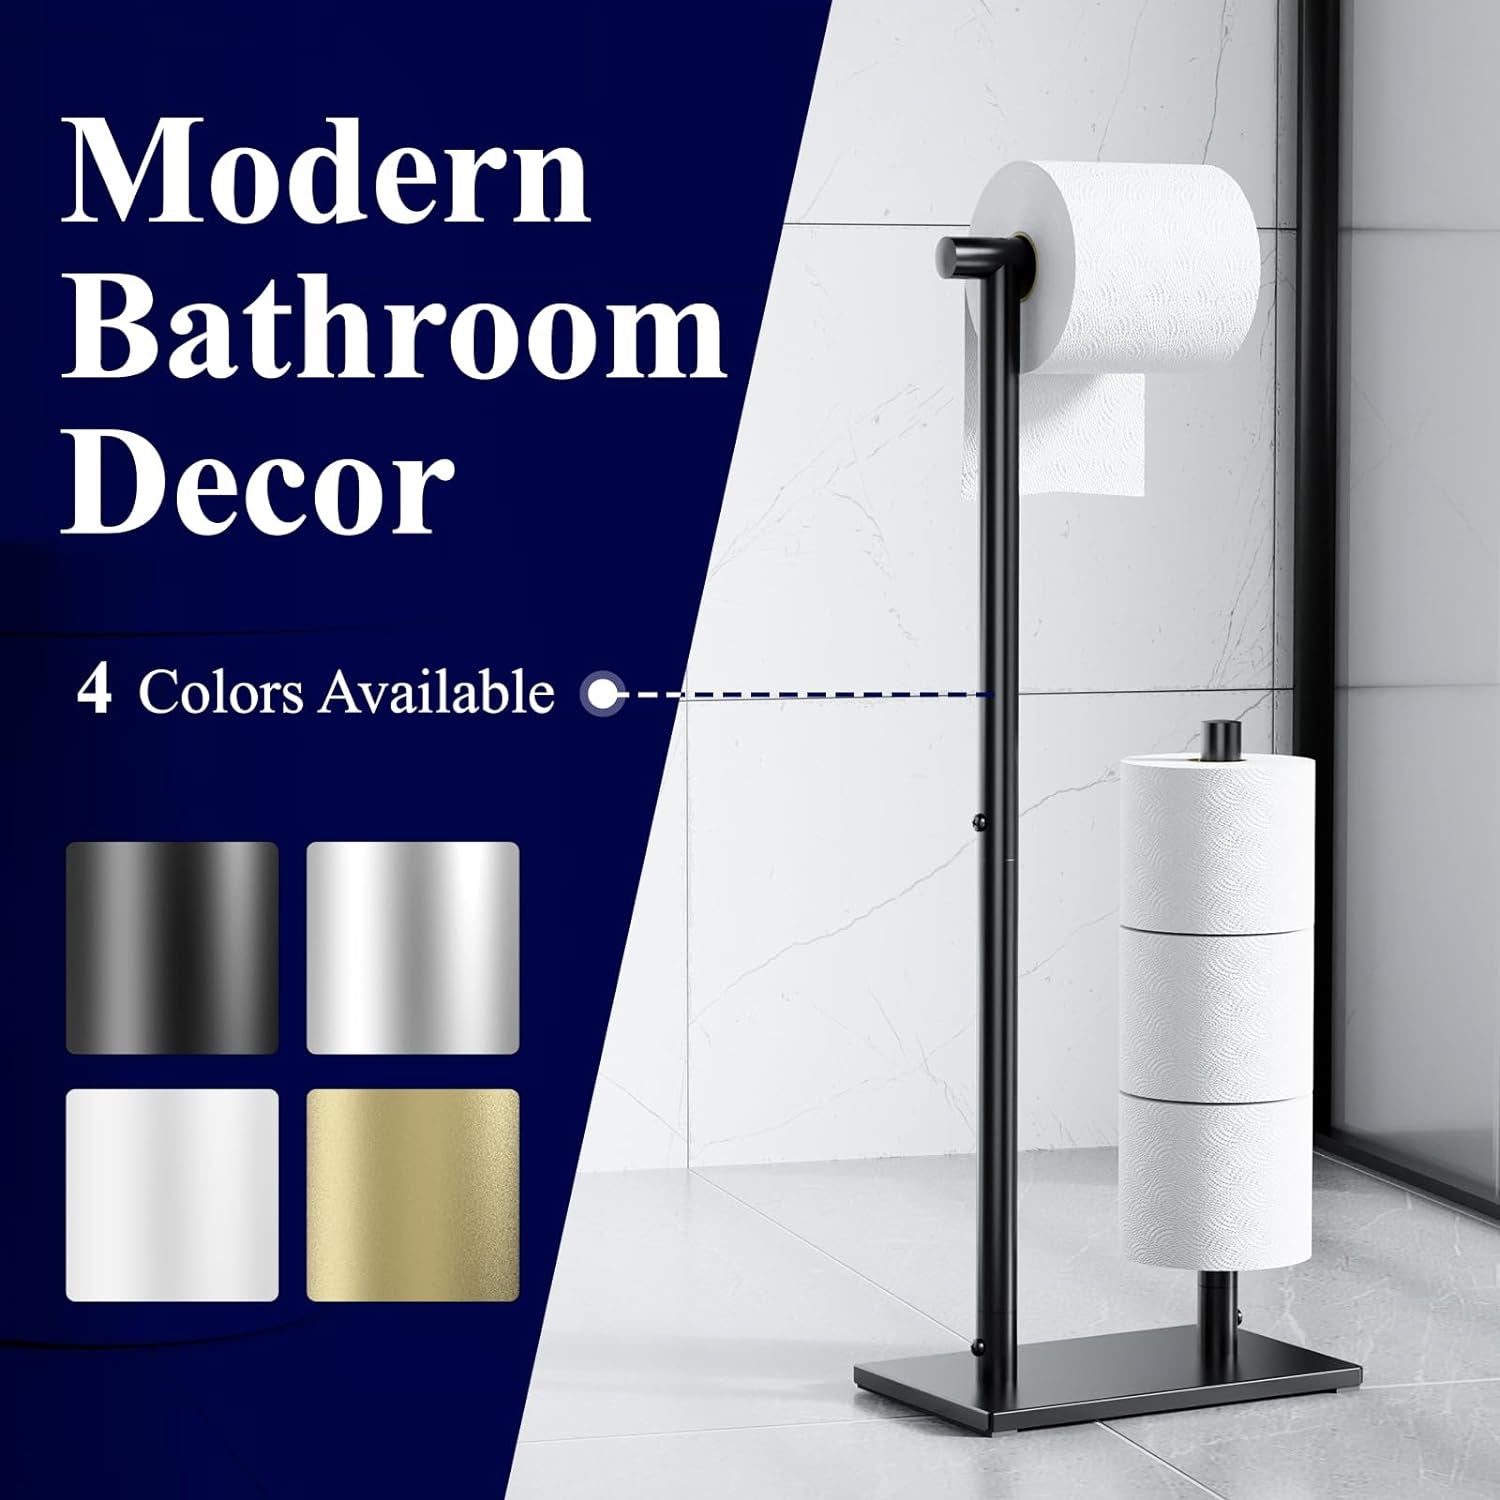 Toilet Paper Holder Free Standing - Large Capacity Toilet Paper Roll Holder for 4 Rolls, Rustproof Toilet Paper Stand with Non-Slip Stable Base, Black Toilet Paper Holder Stand for Bathroom